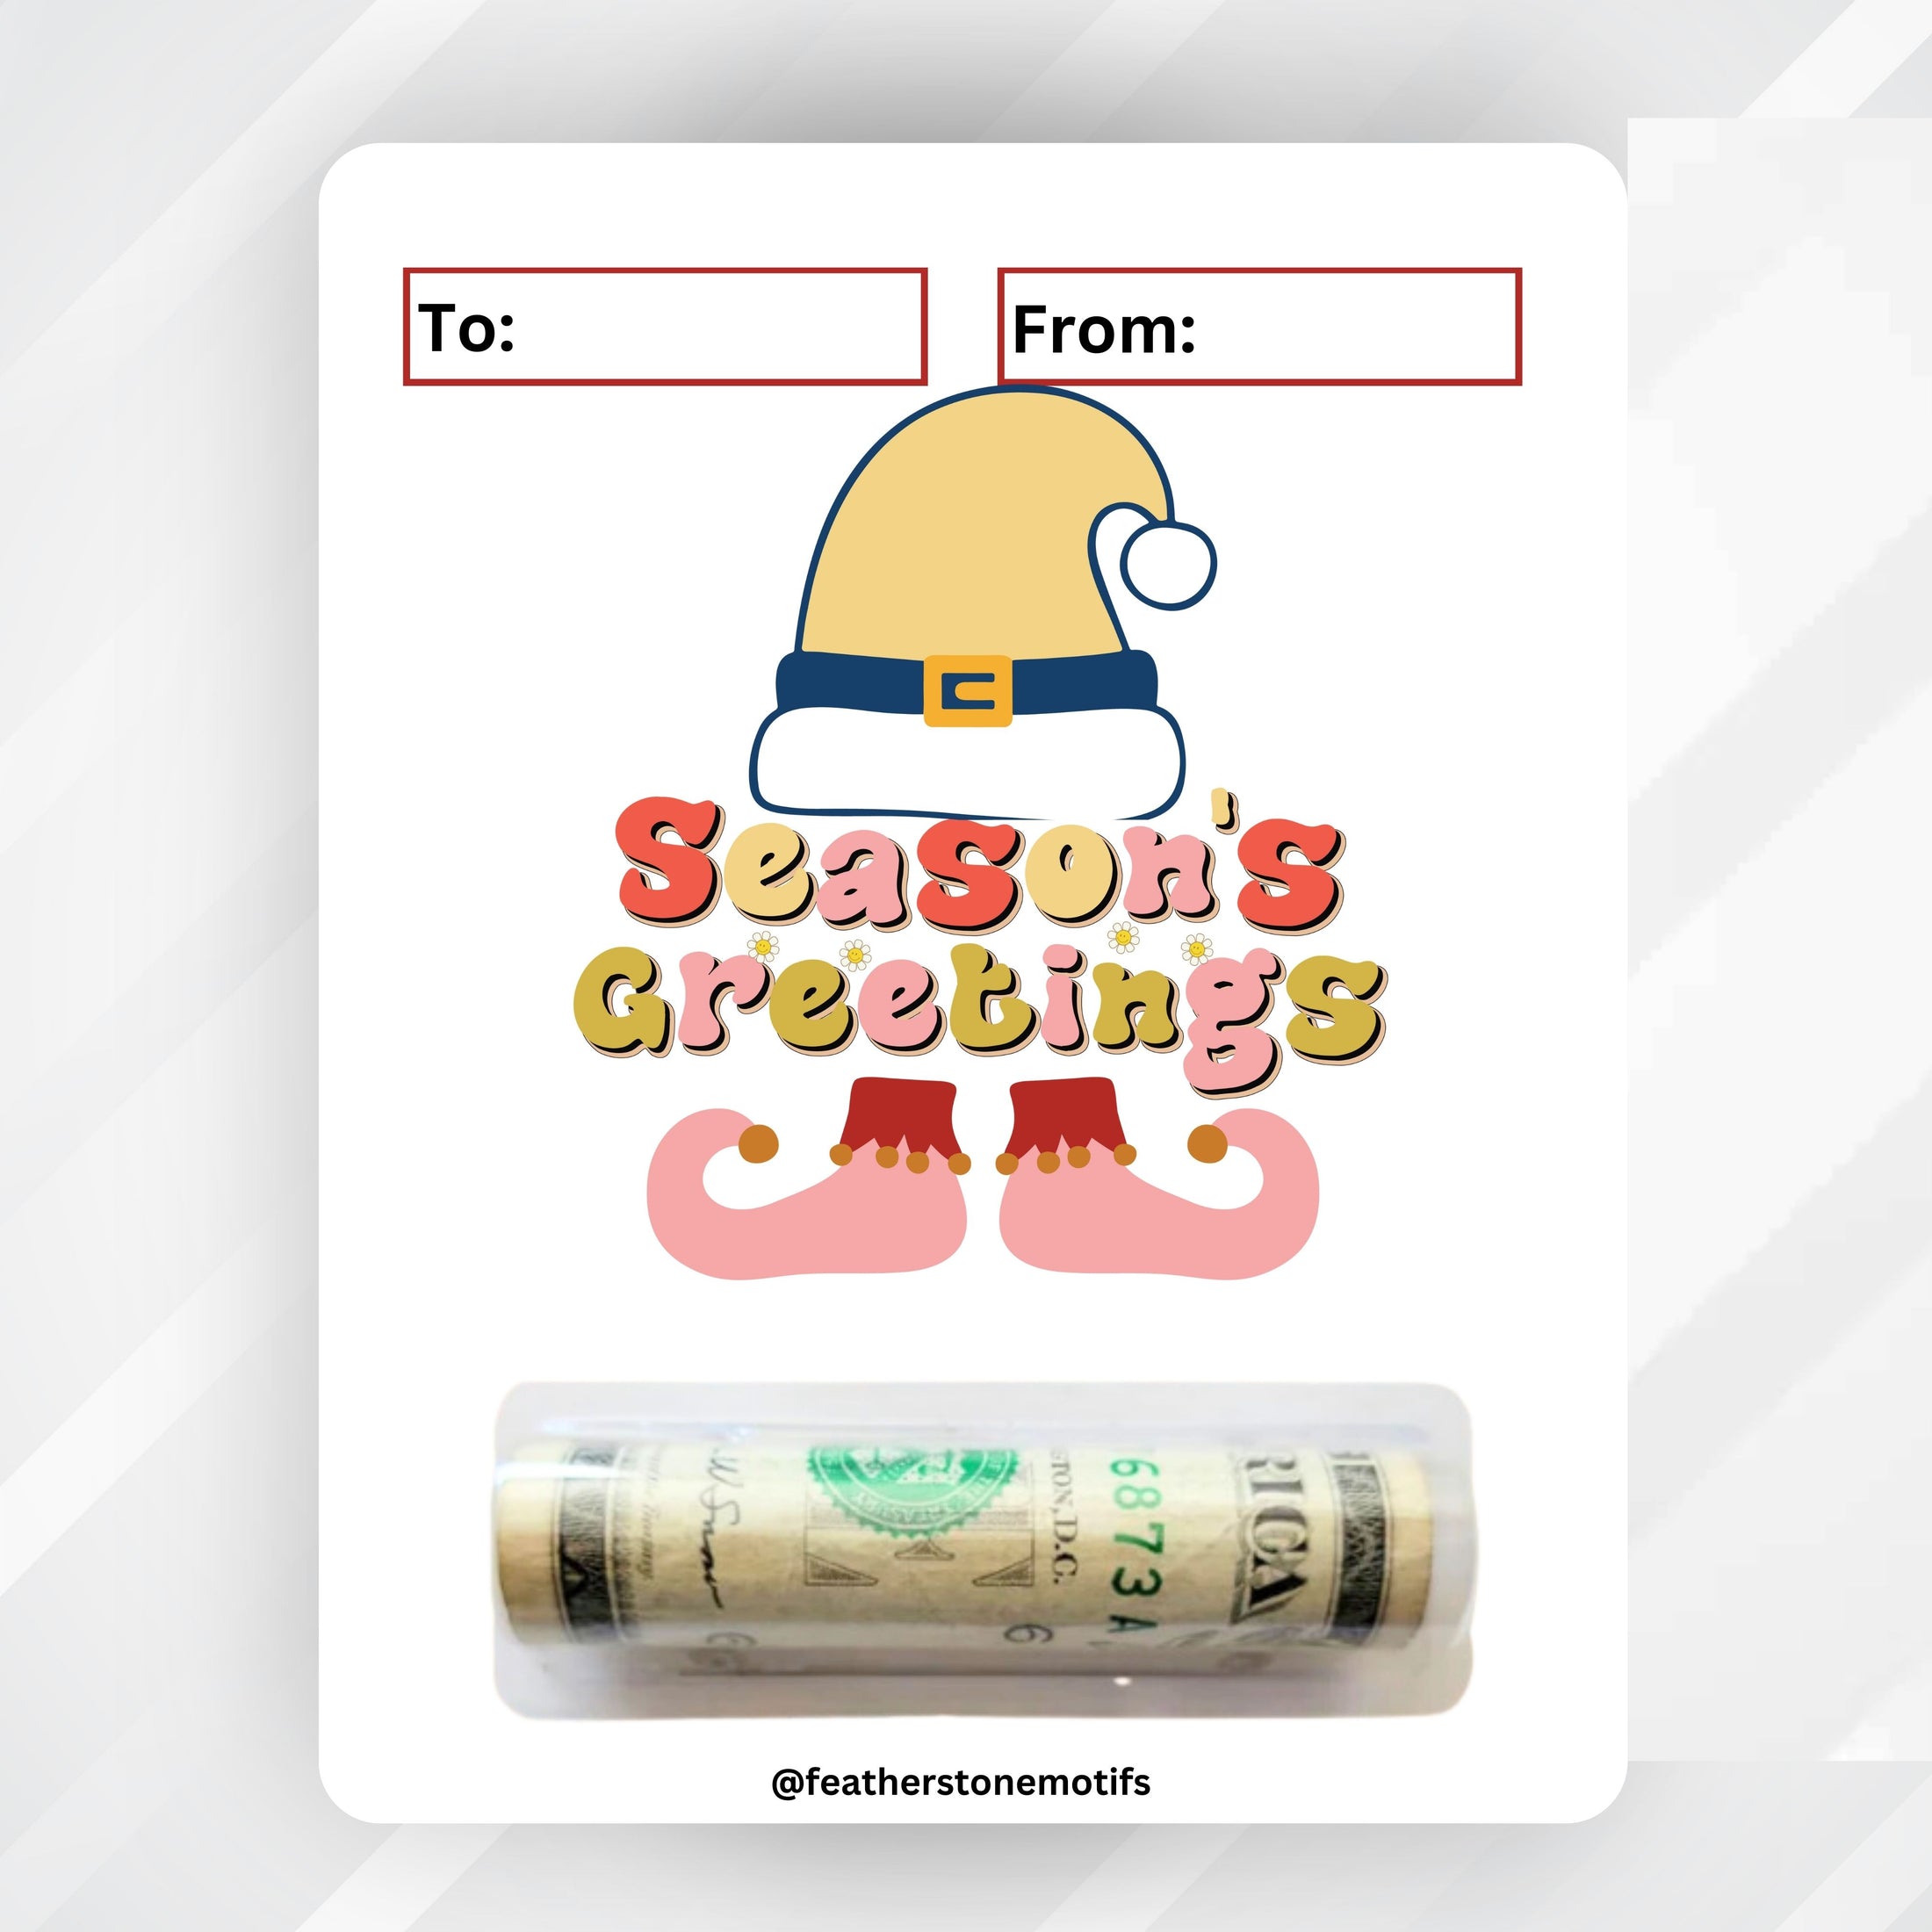 This image shows the money tube attached to the Elf Greetings money card.